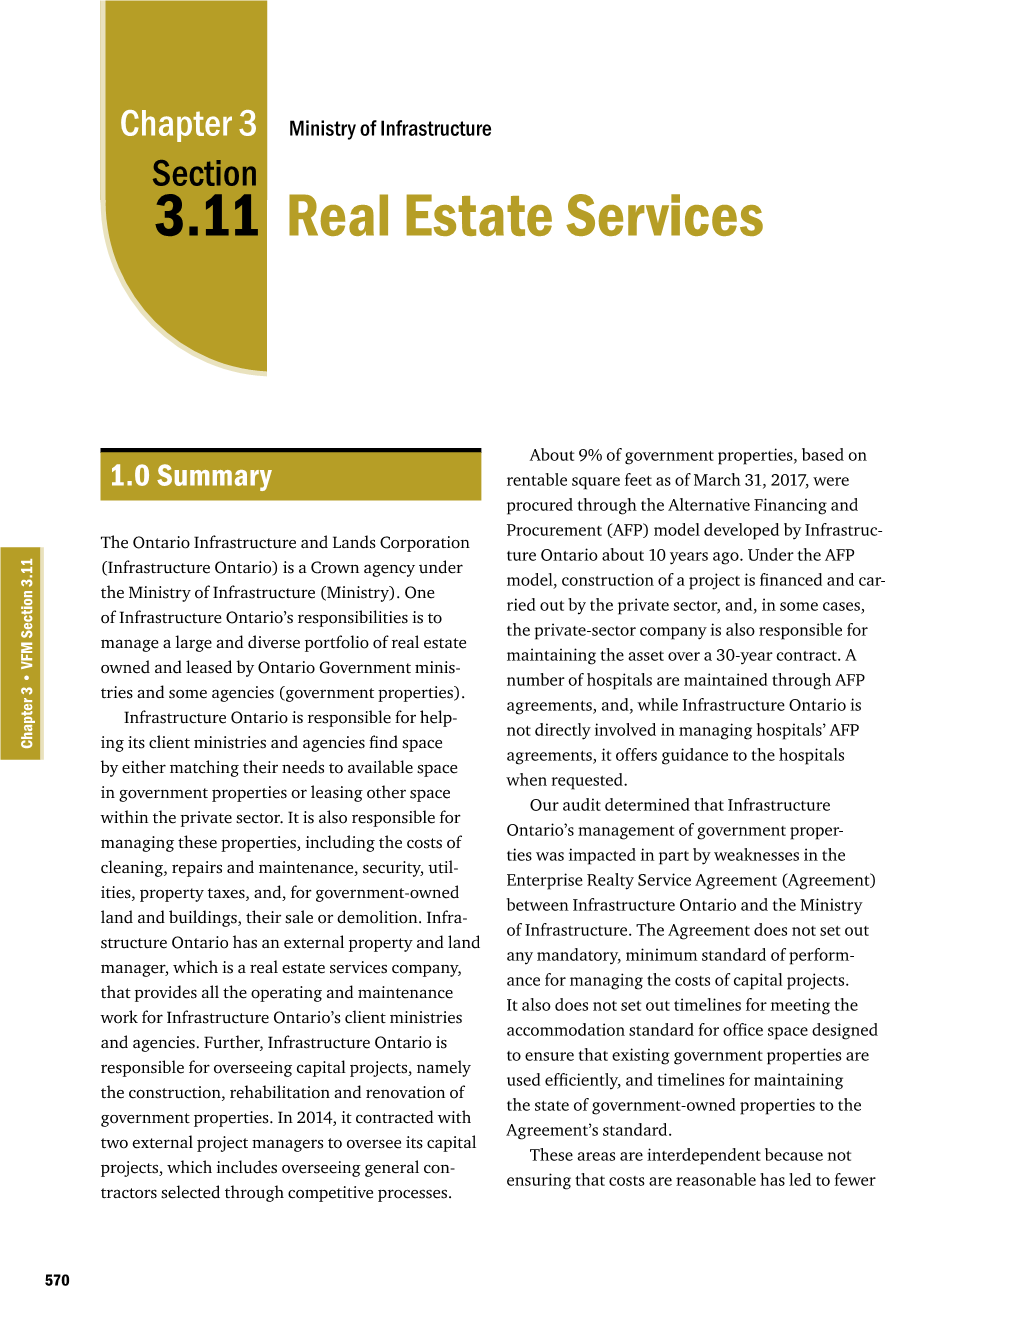 3.11 Real Estate Services